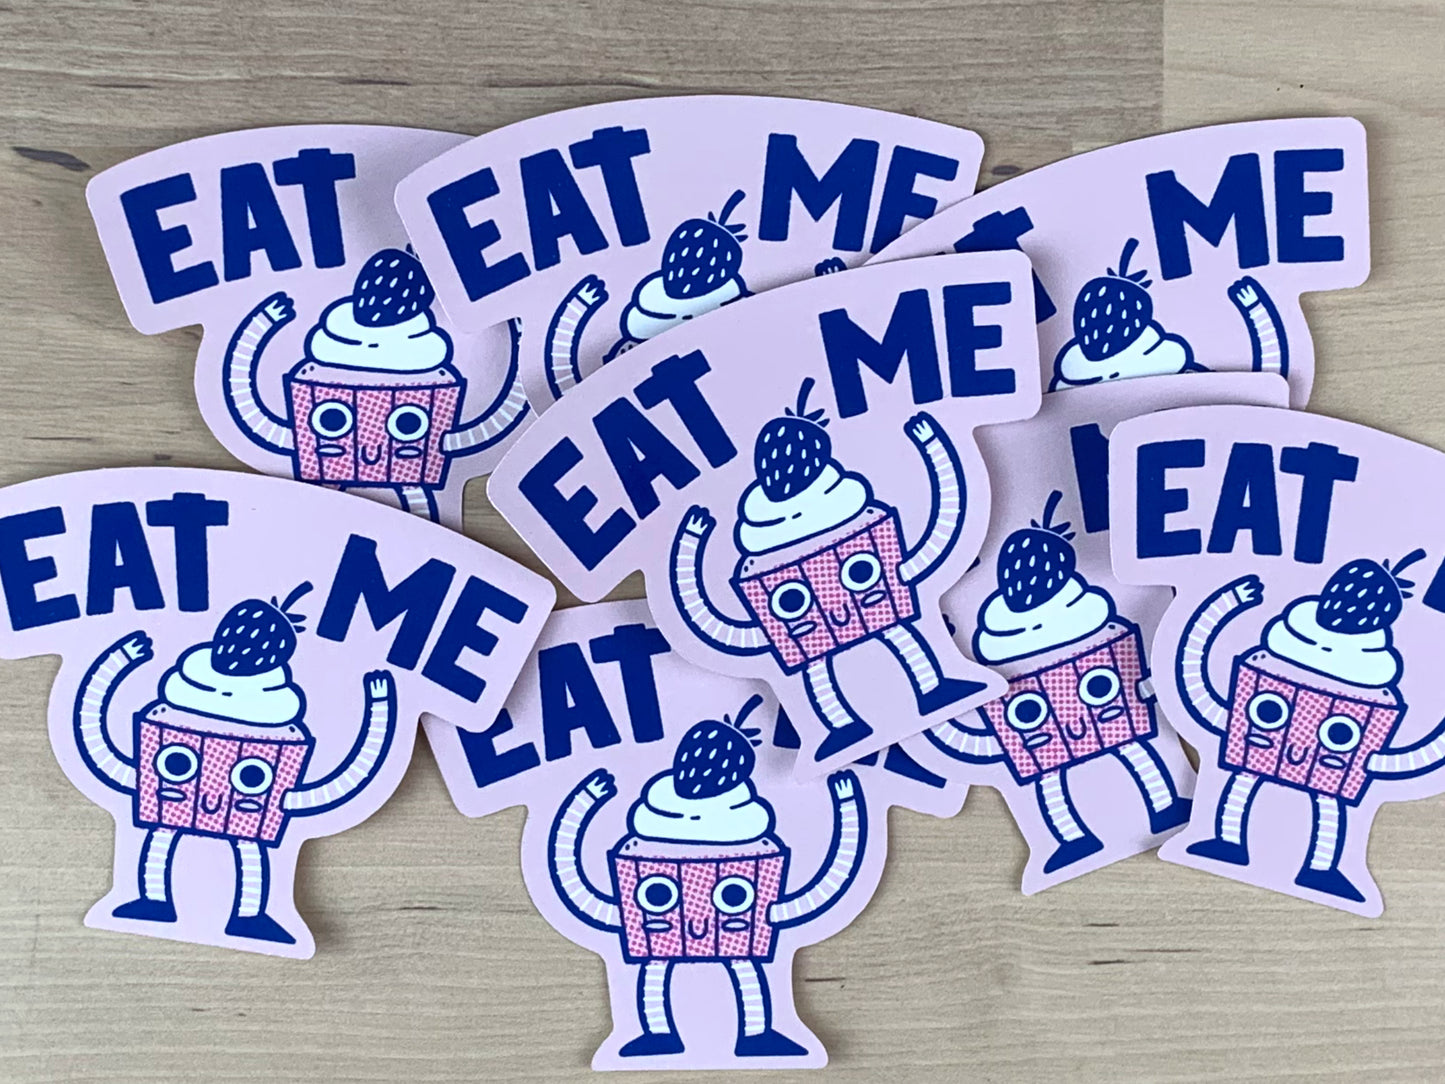 Stickers in pink and blue of an anthropomorphic cupcake with the words "Eat me" above it.